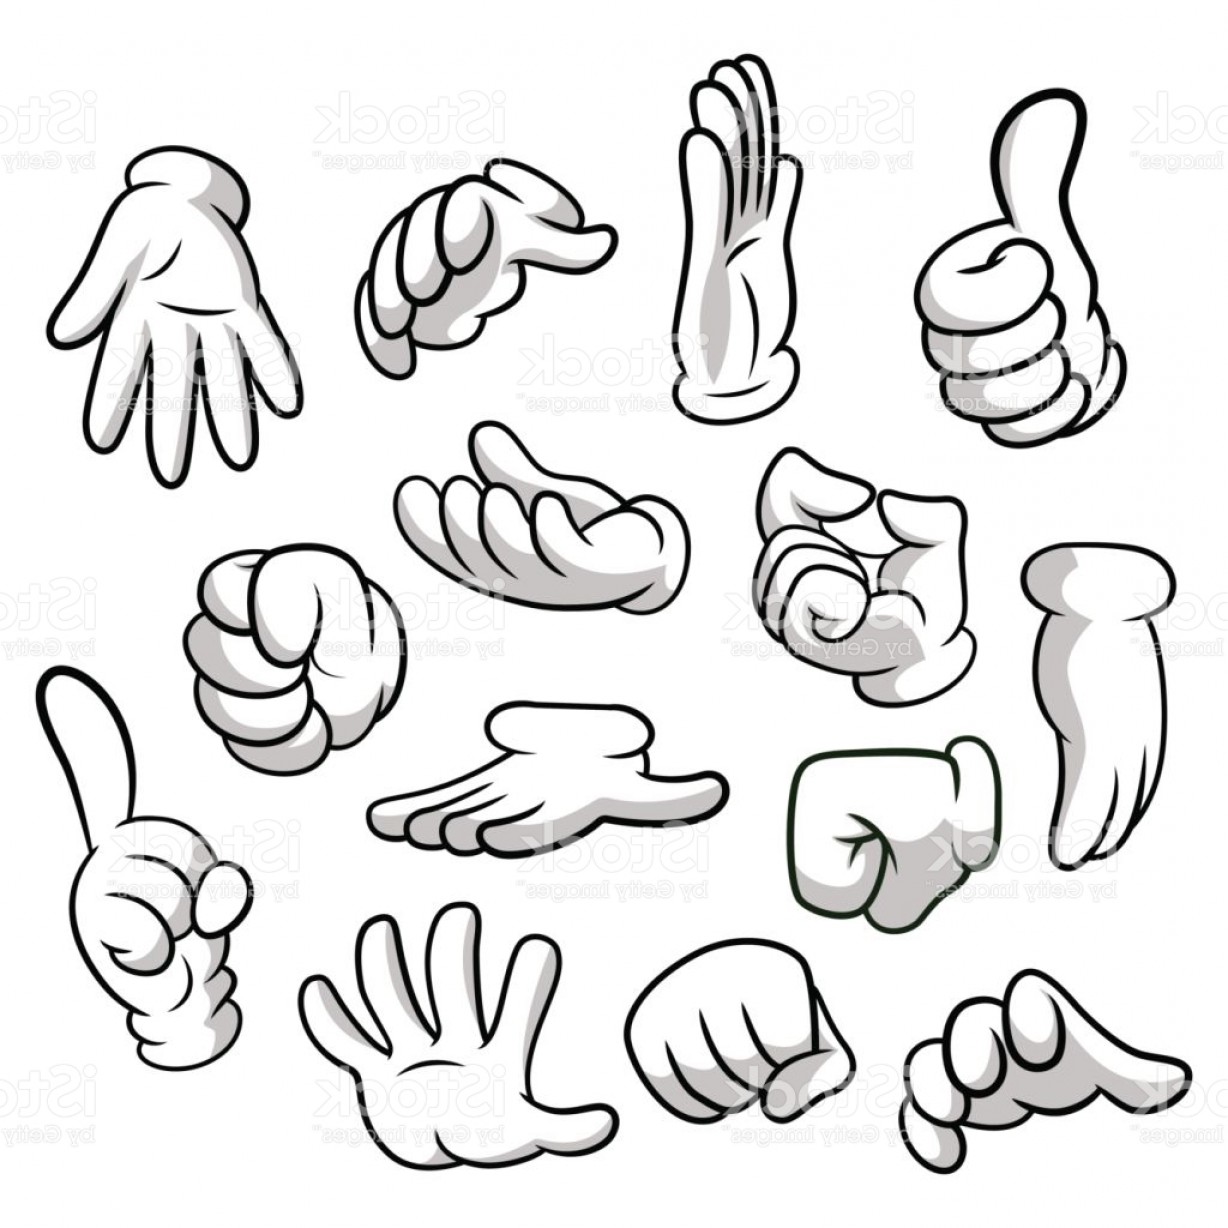 Cartoon Hands With Gloves Icon Set Isolated On White